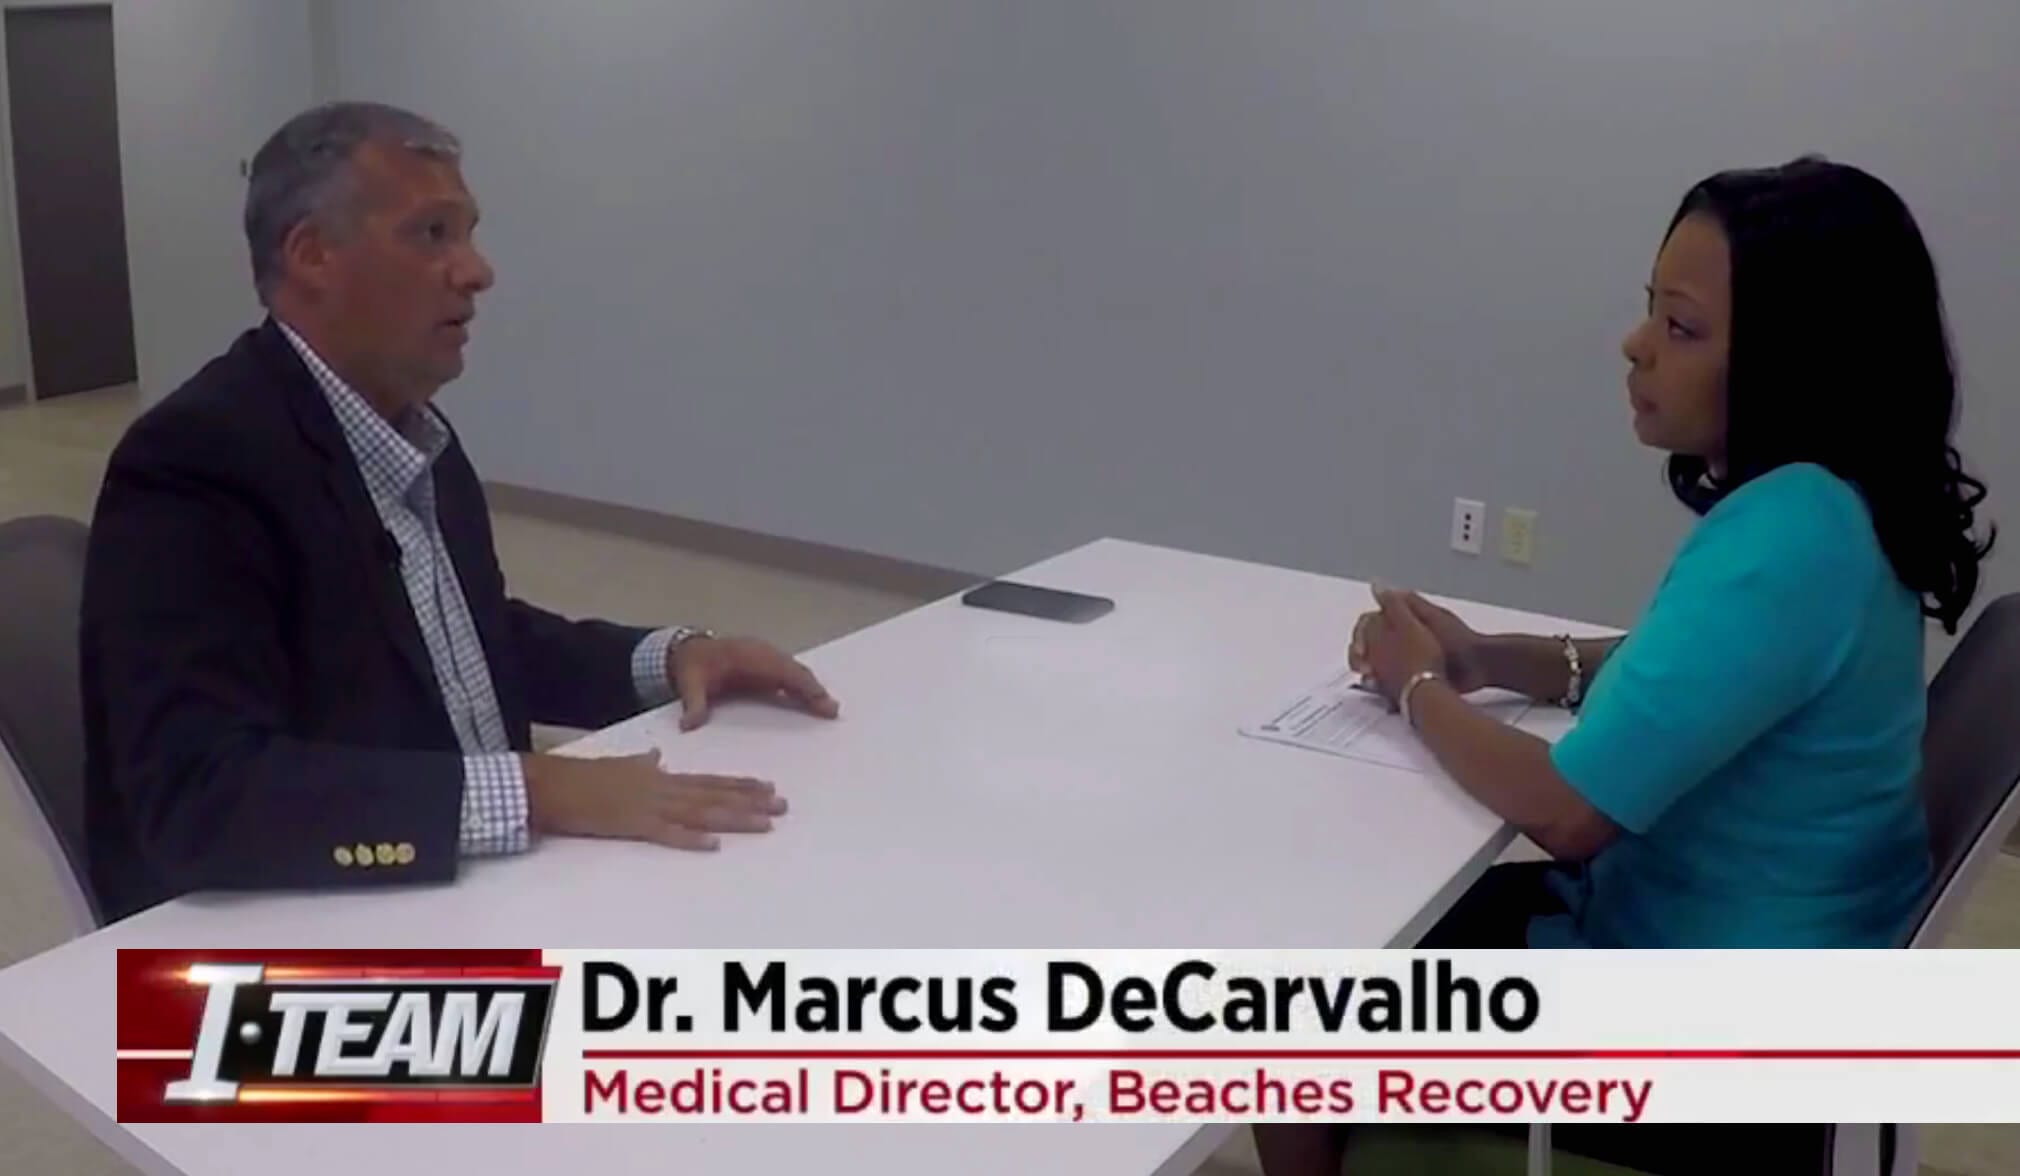 News Coverage of Dr. Marcus DeCarvalho